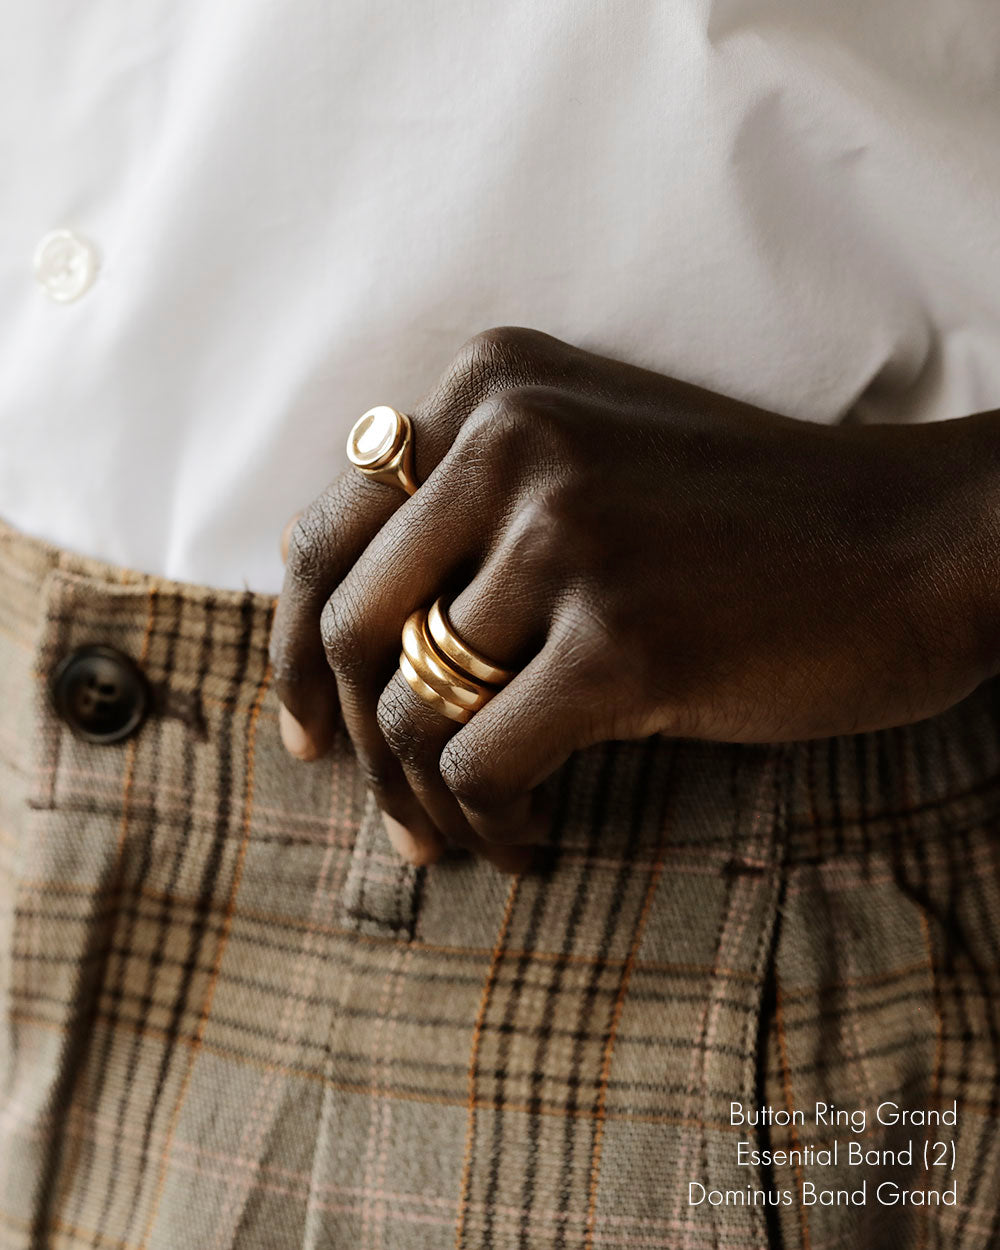 Cropped image of black woman's hands wearing gold rings. Large 18k yellow solid gold signet style ring with a large soft concave button circle atop the signet.